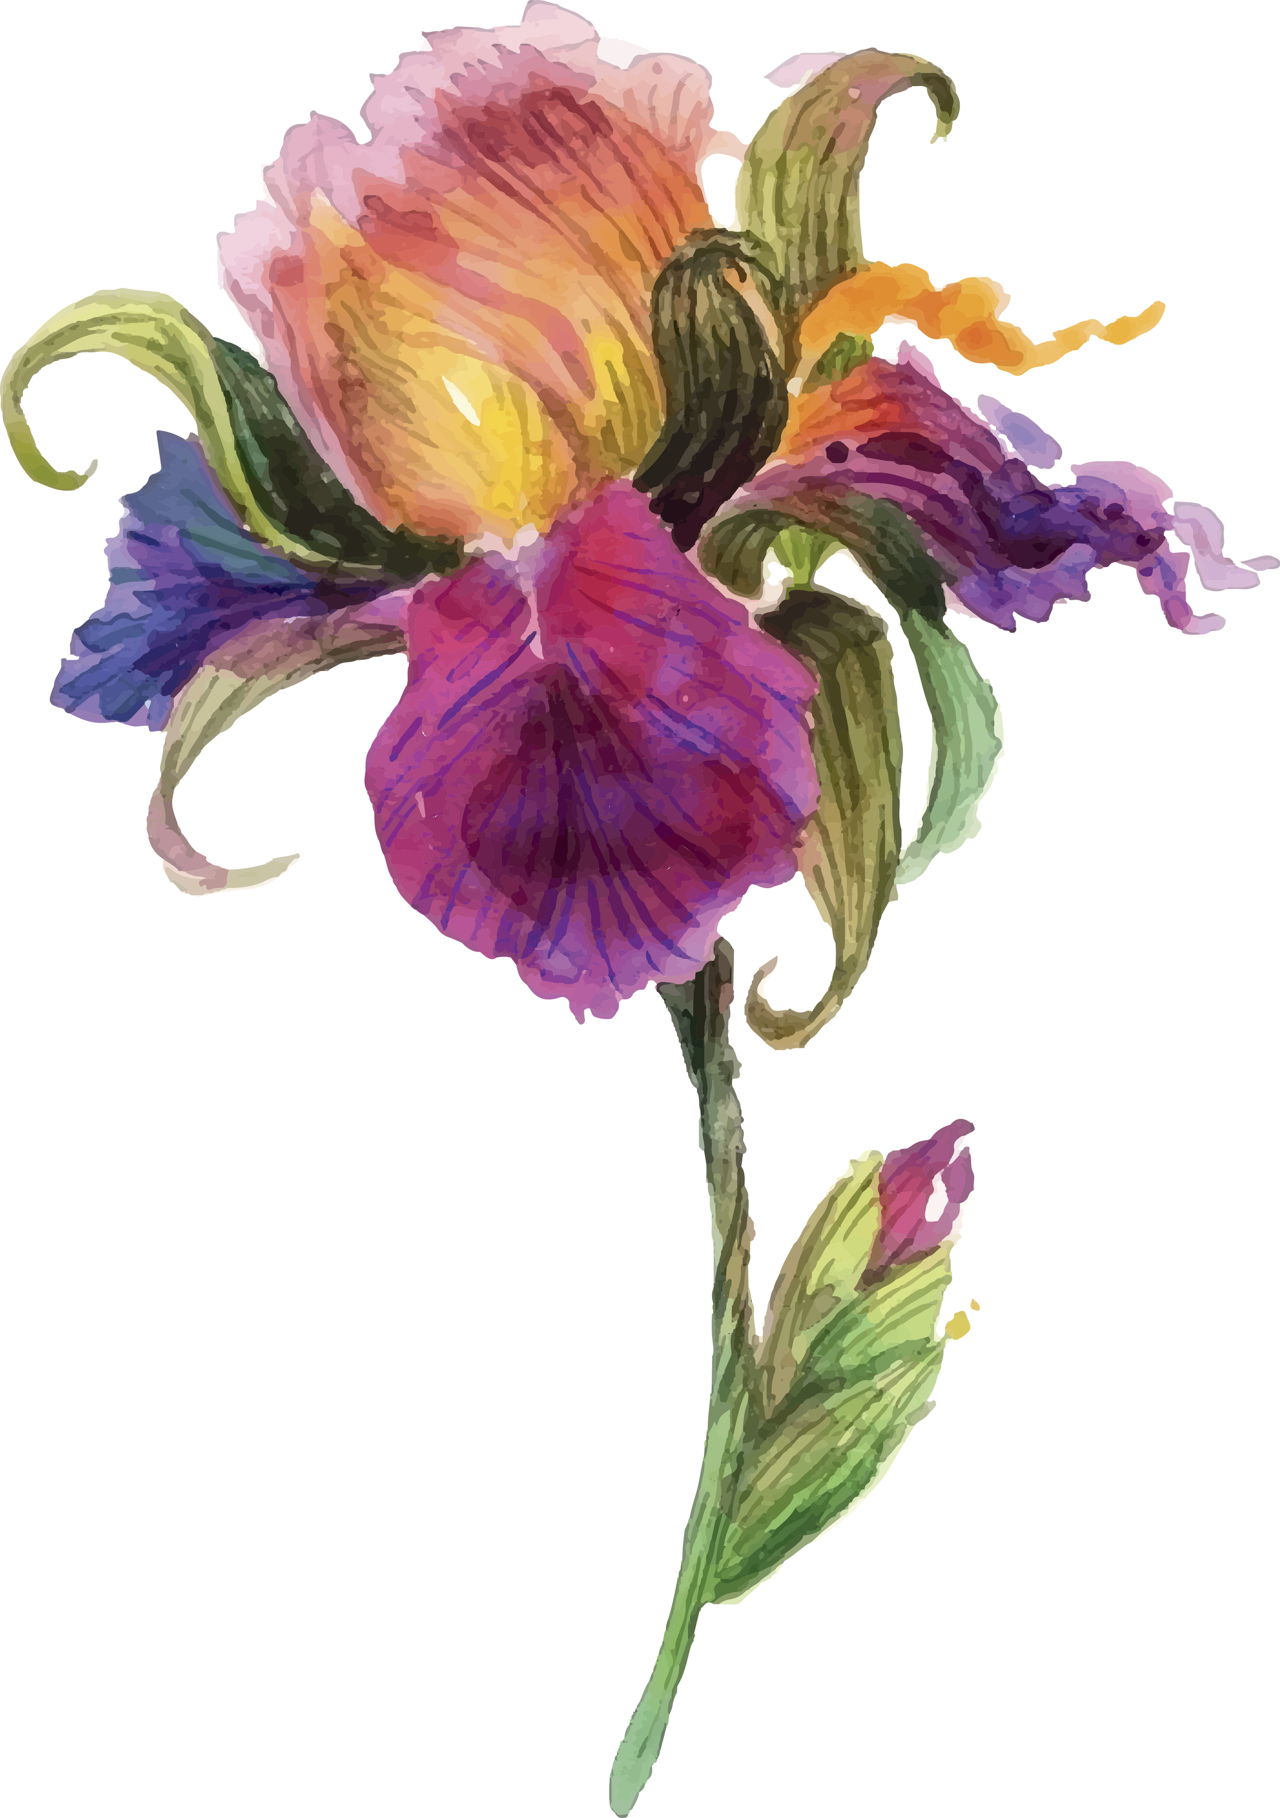 Learn How to Draw Flowers With These Step-by-step ...